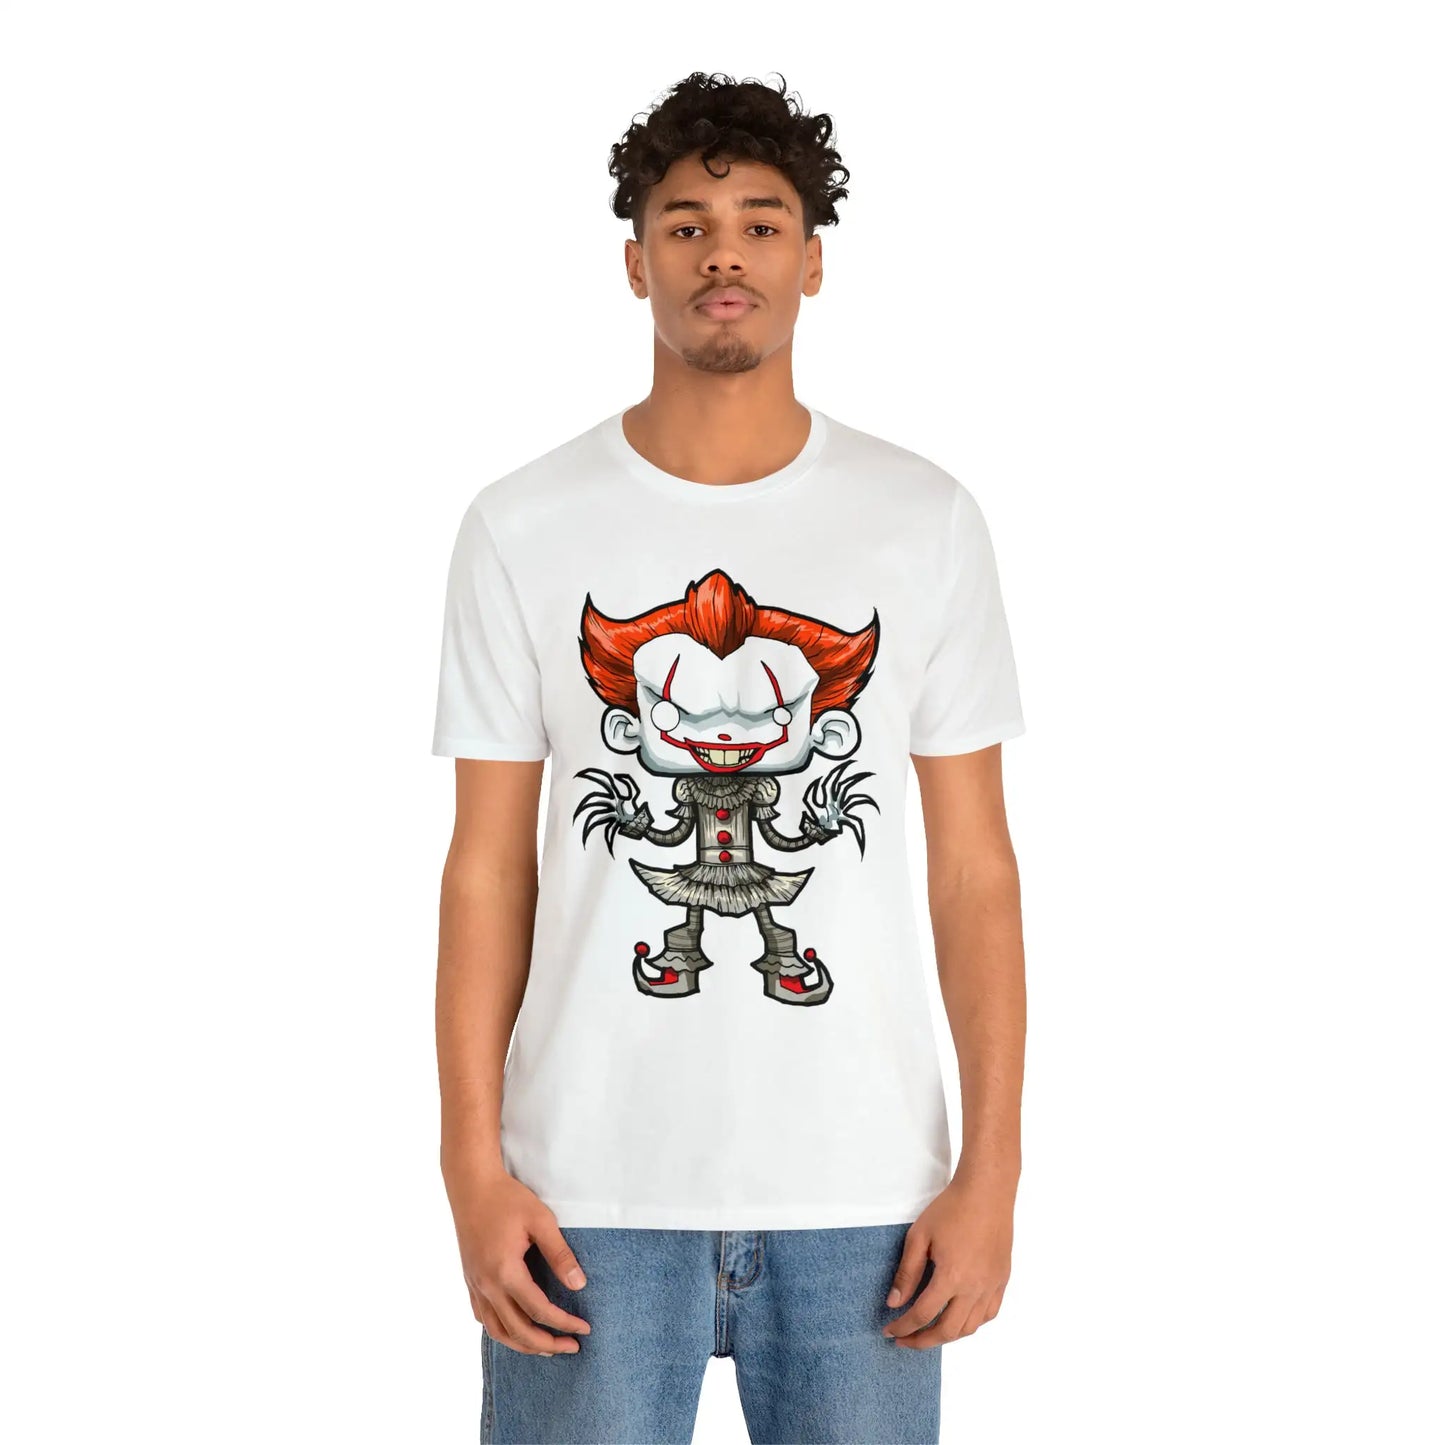 Pennywise IT T-Shirt Cartoon Parody Tee Unisex For Men and Women